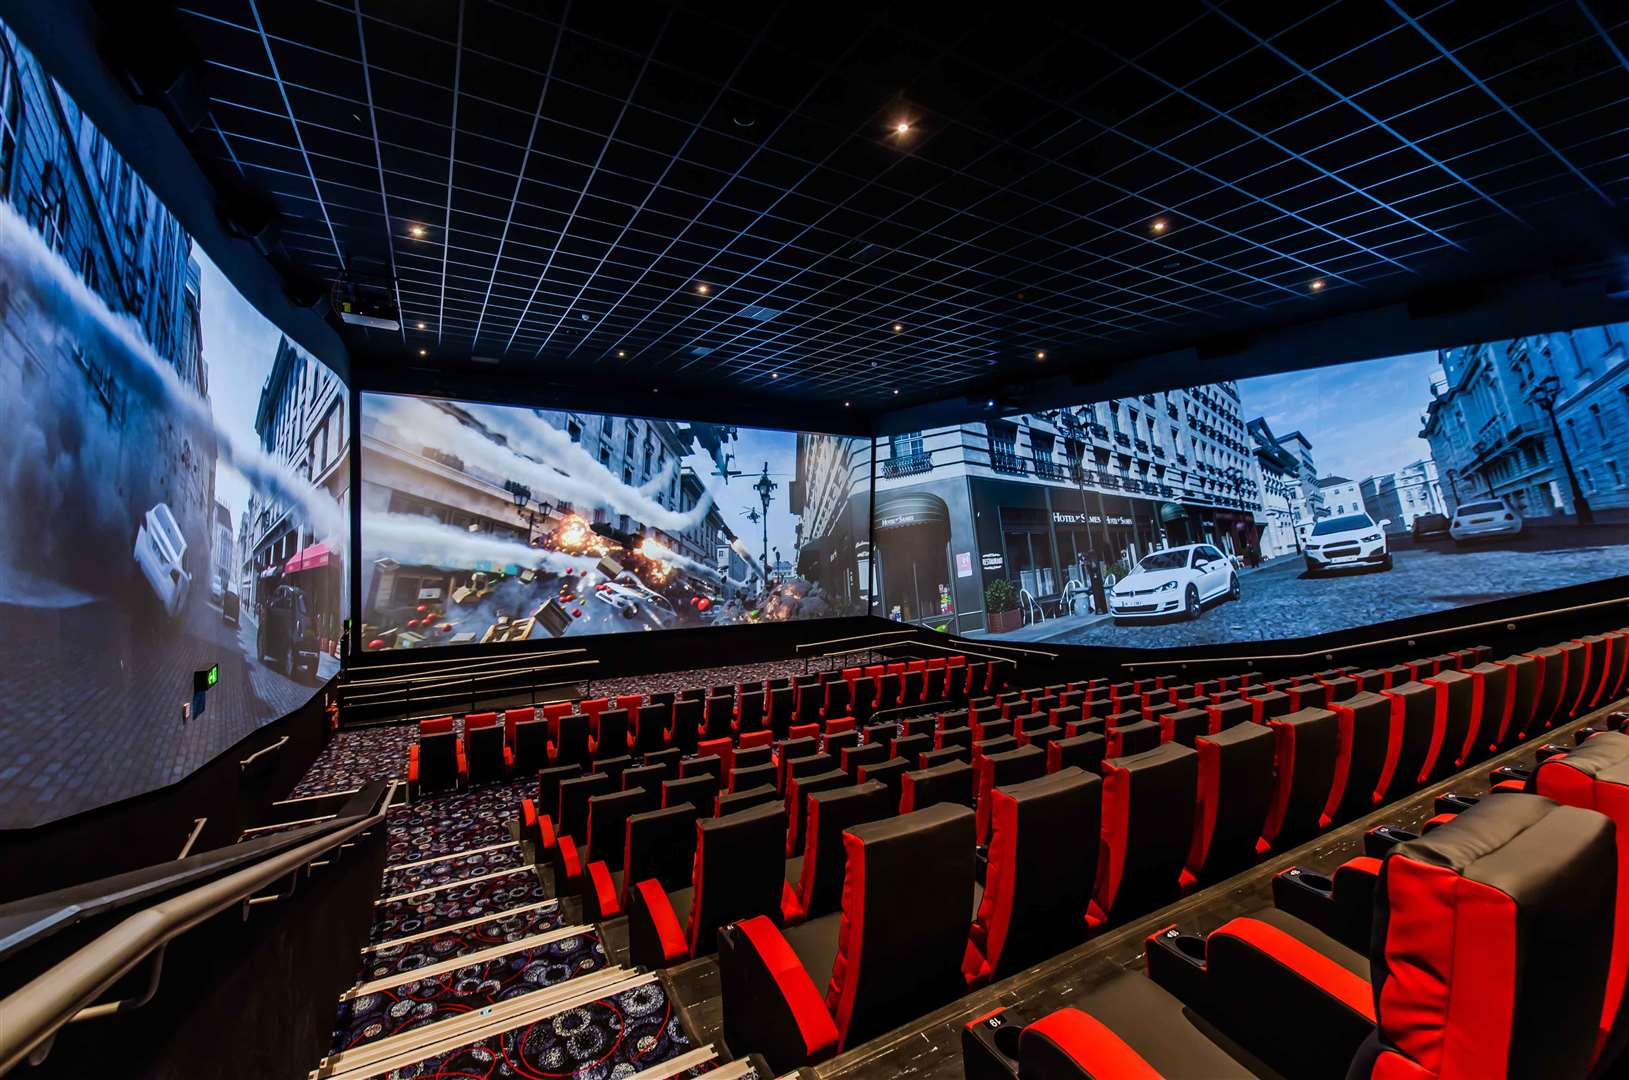 A ScreenX auditorium is to open at Ashford Cineworld with a midnight screening of The Batman. Picture: Cineworld